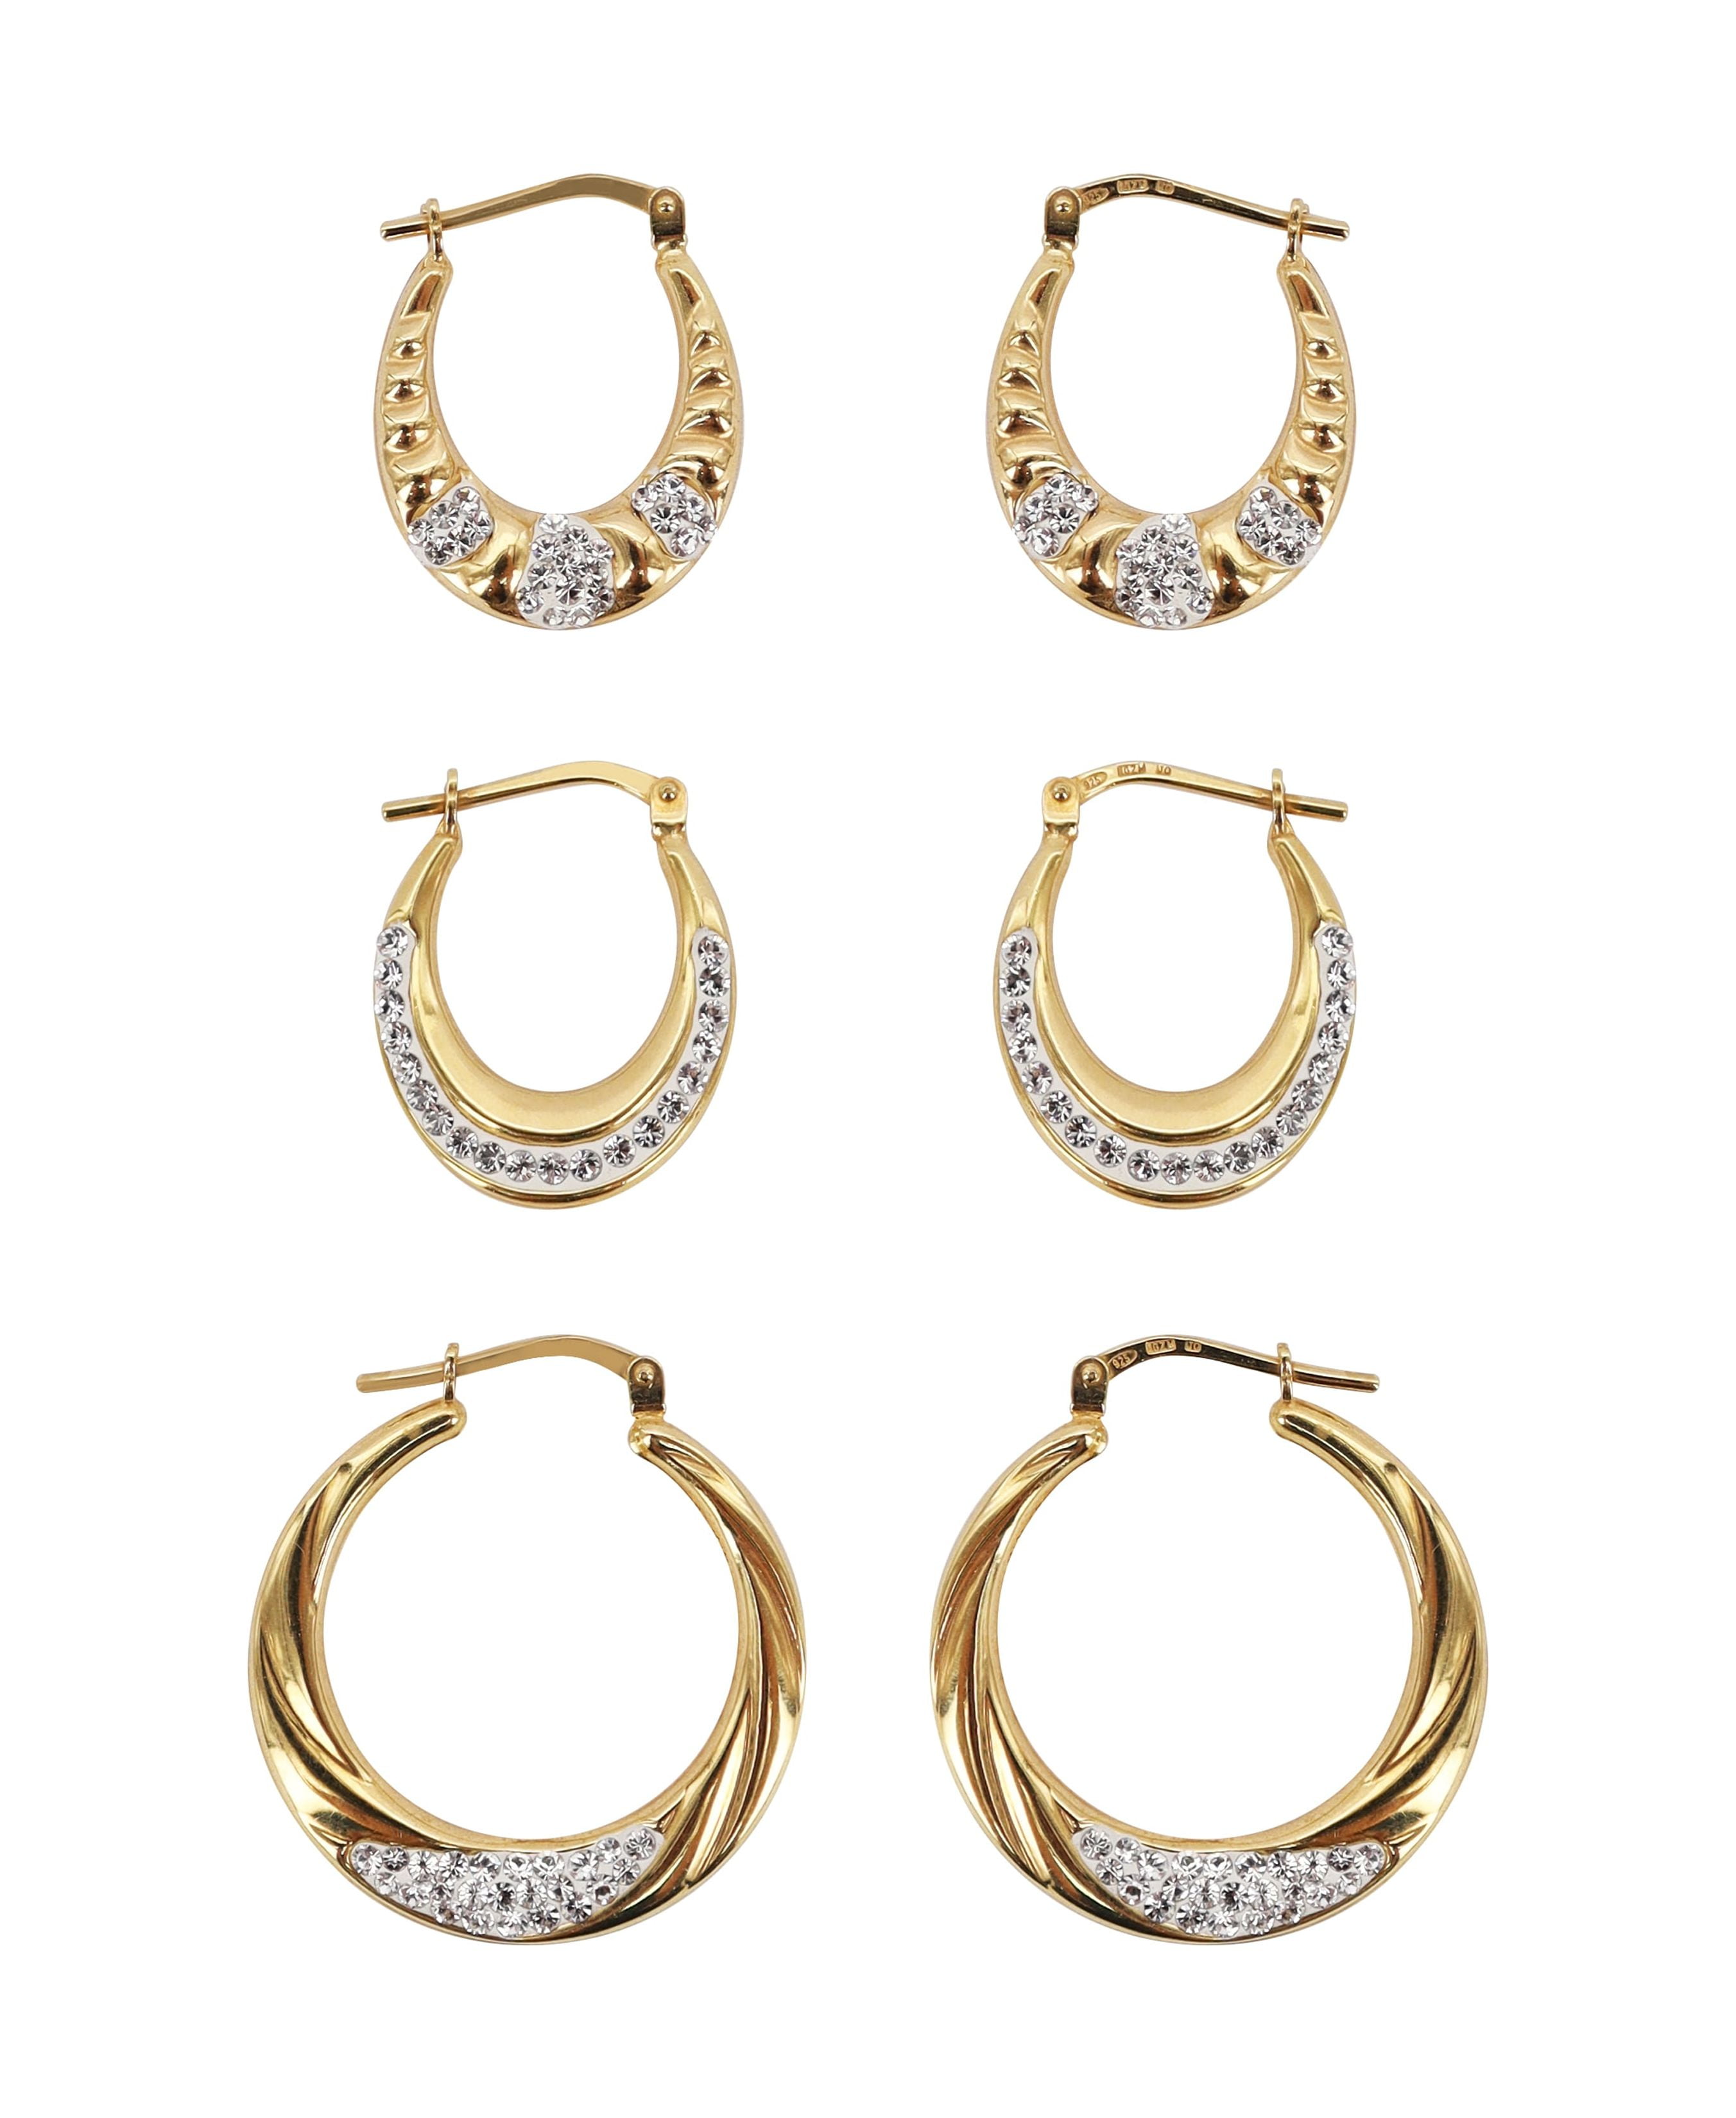 Brilliance Fine Jewelry 14K Gold Plated Sterling Silver Adult Hoop Earrings Set Adults 3 Pairs ae39dd47 6d8e 4939 a25f cb0e4c4ddc91.1fbcd674d1aef06f258cdbe8e3674108